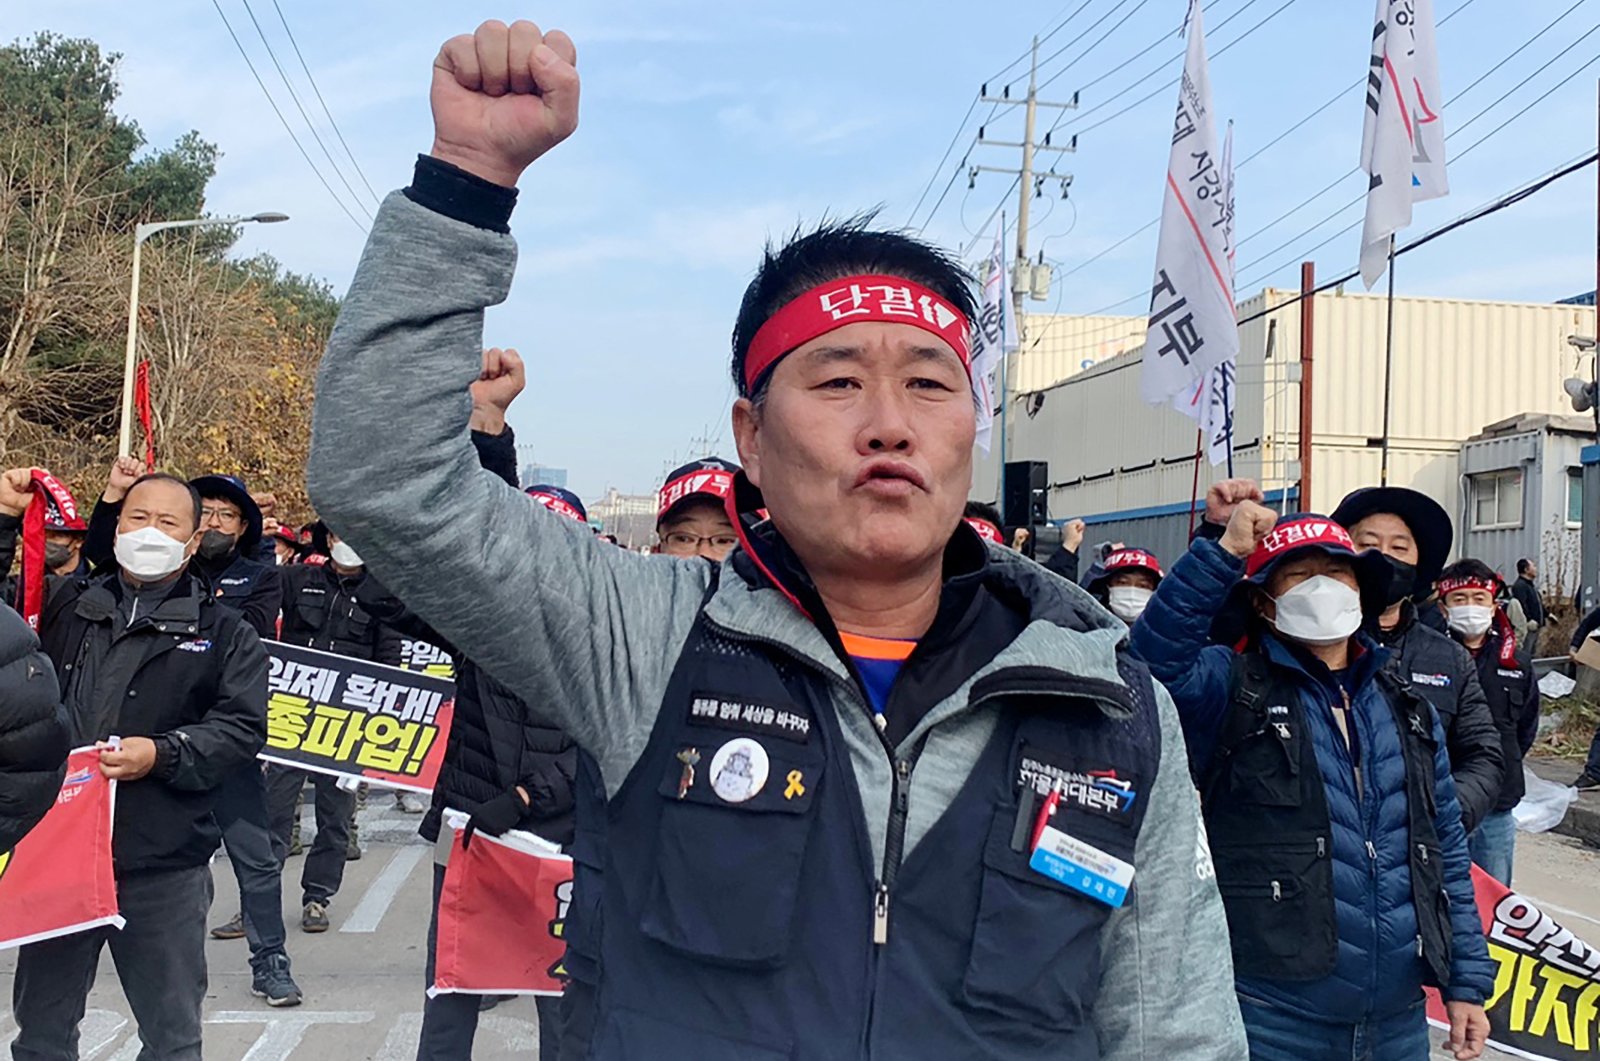 Unionized truckers shout slogans during their rally as they kick off their strike in front of transport hub Uiwang, south of Seoul, South Korea, Nov. 24, 2022. (Reuters Photo)